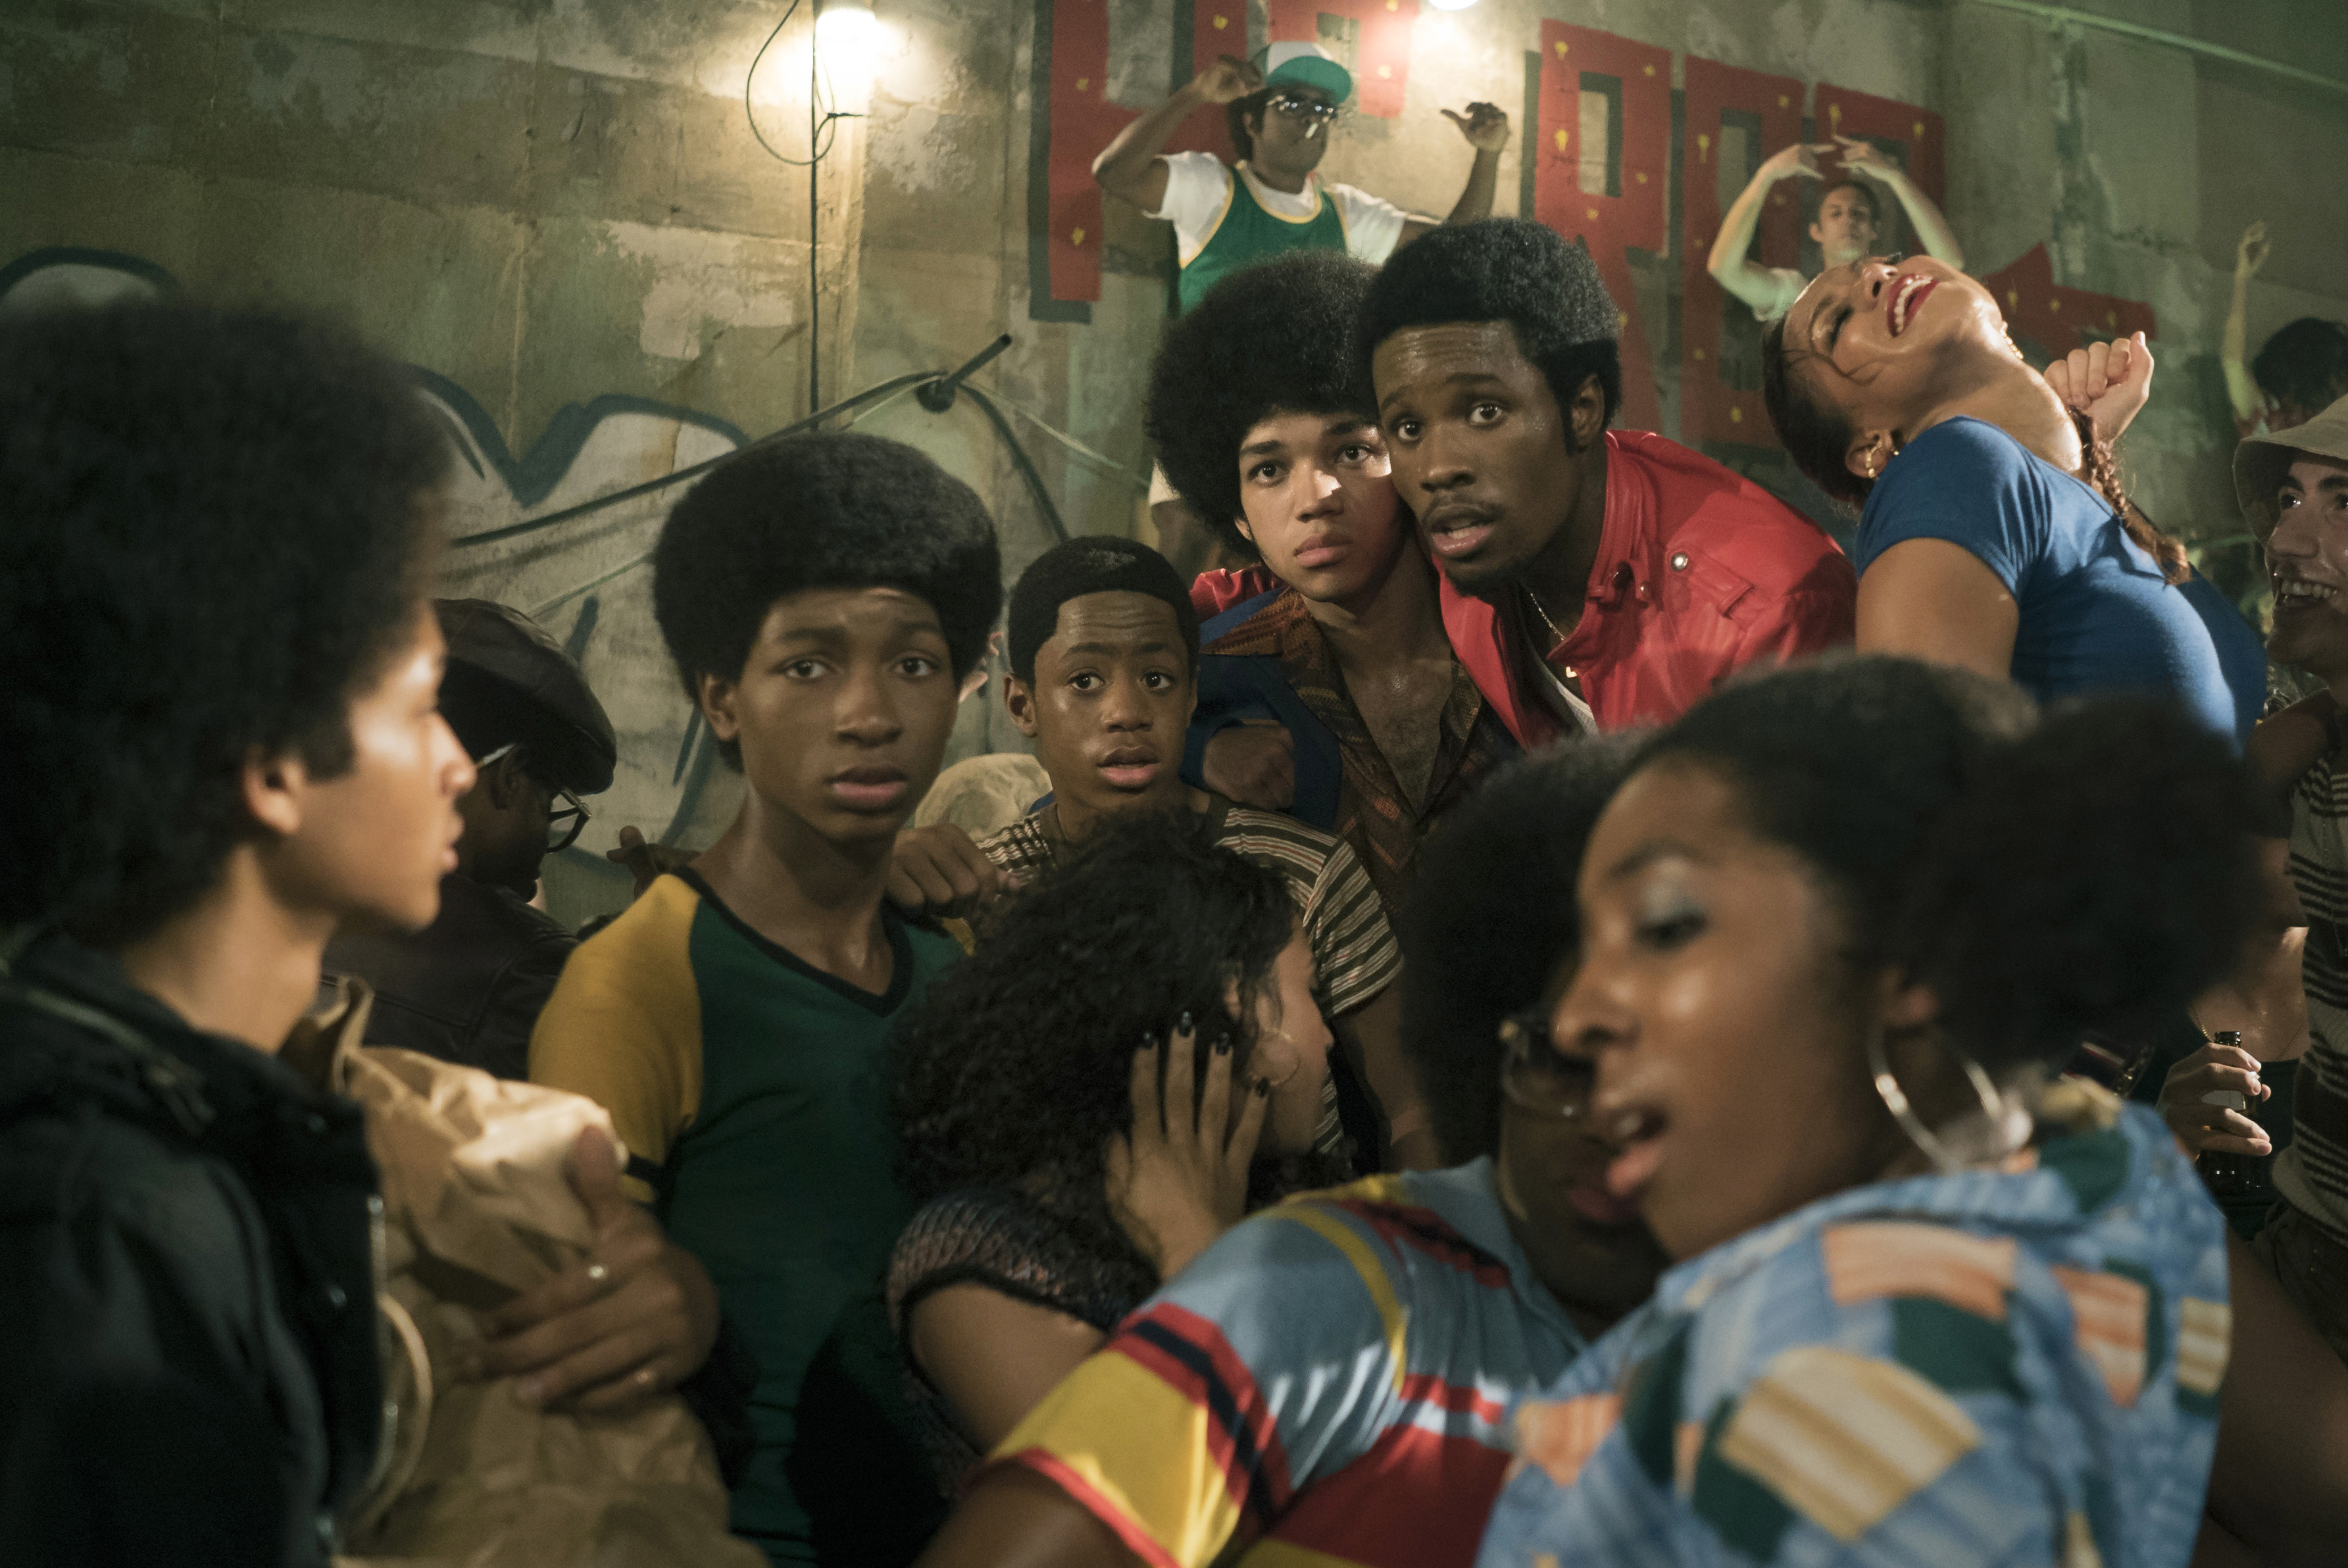 The Get Down is available now on Netflix.